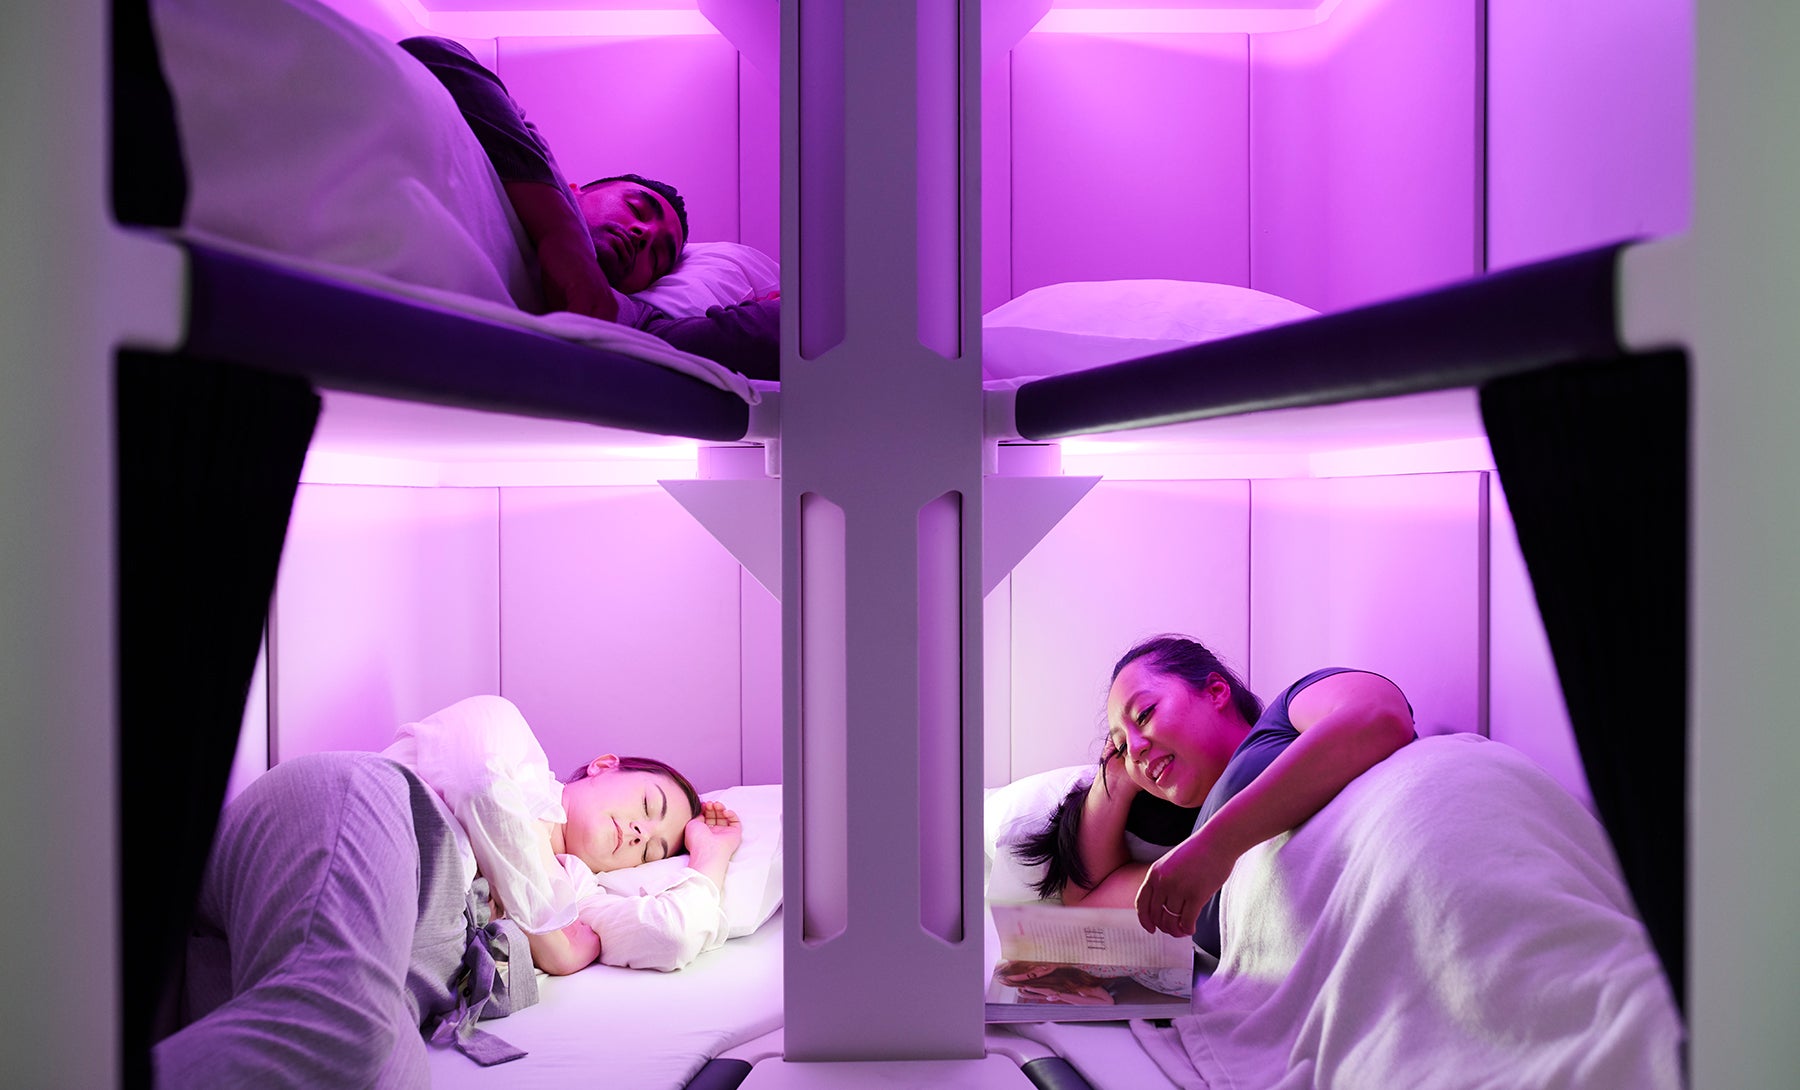 Air New Zealand Will Introduce the World’s First Economy Class Bunk Beds